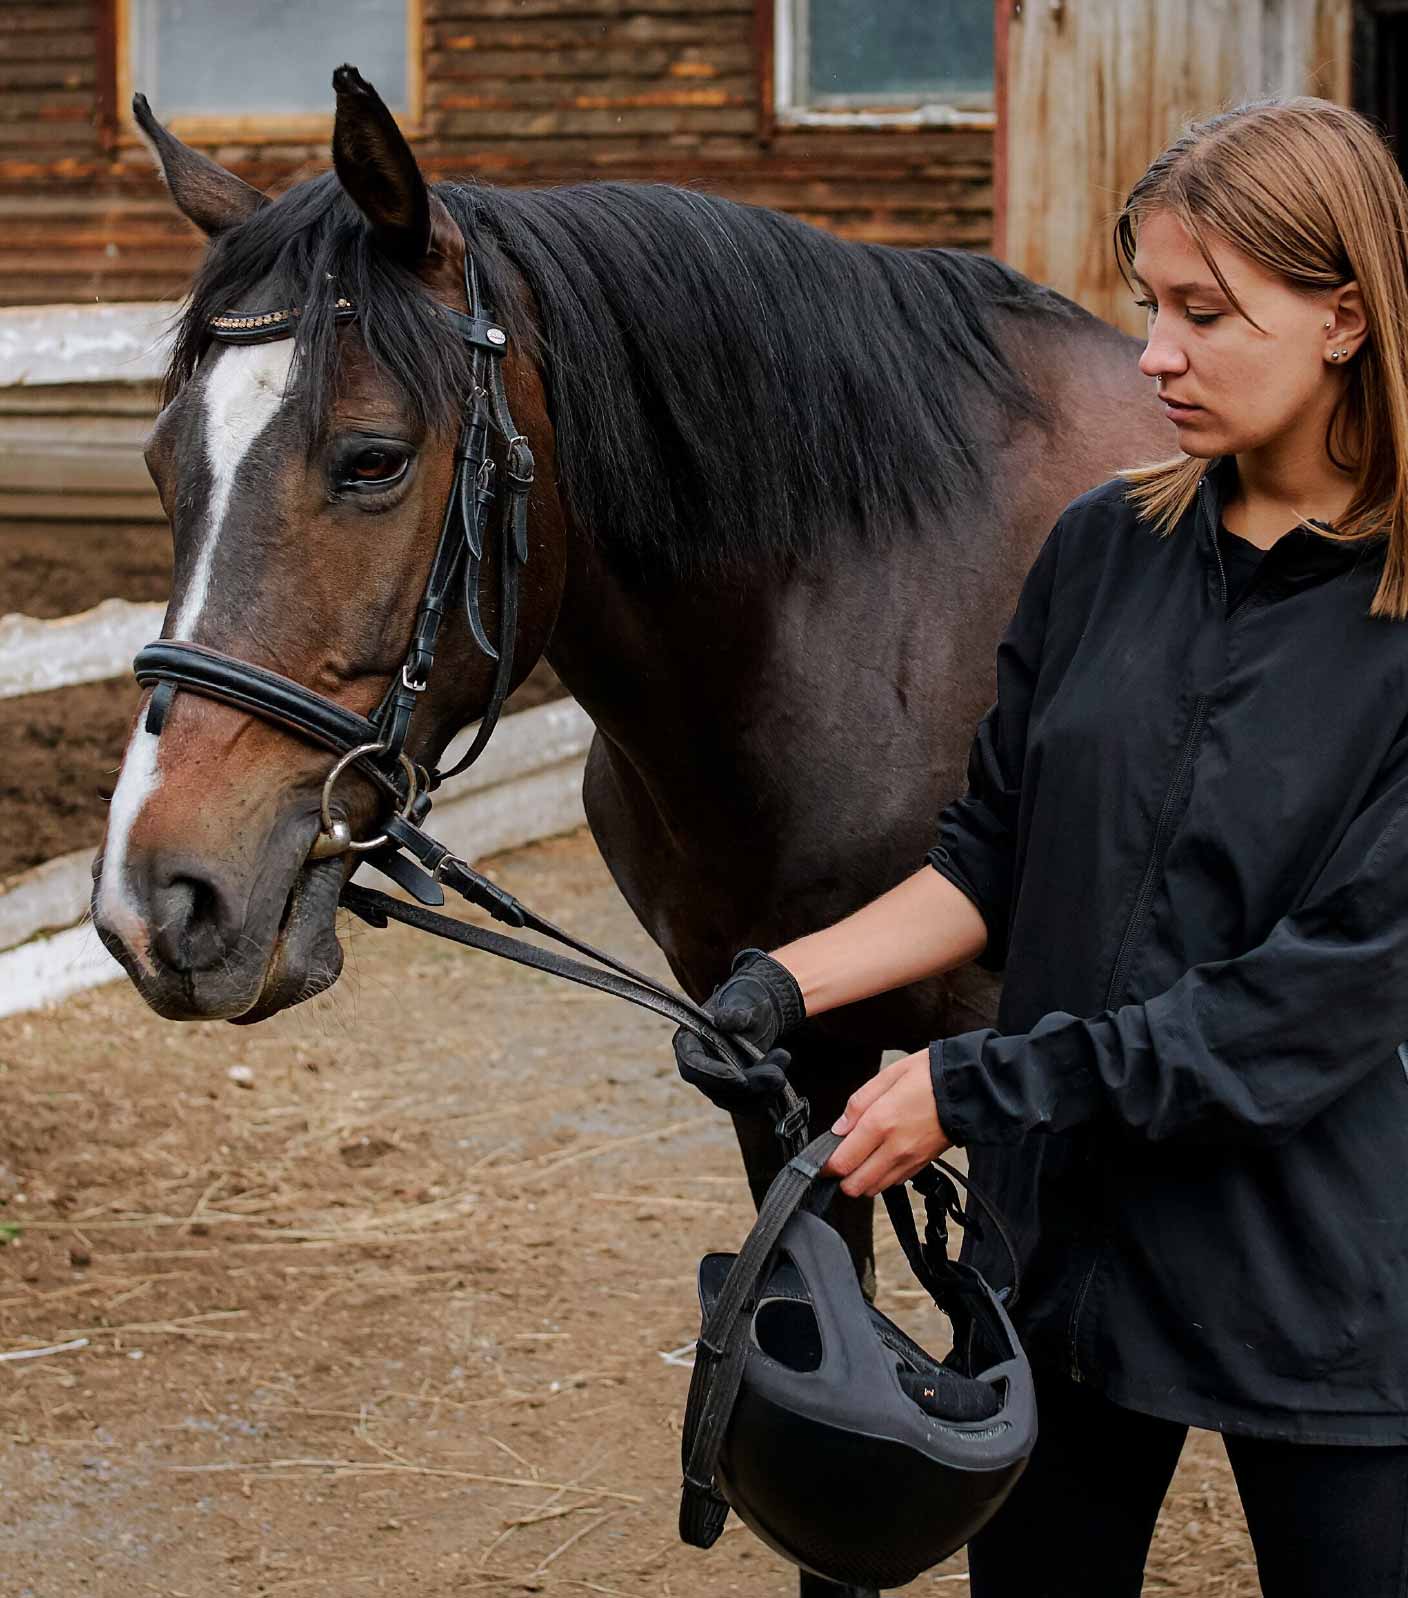 A female student dressed in black standing next to a dark brown horse holding the reins and looking at the horse.